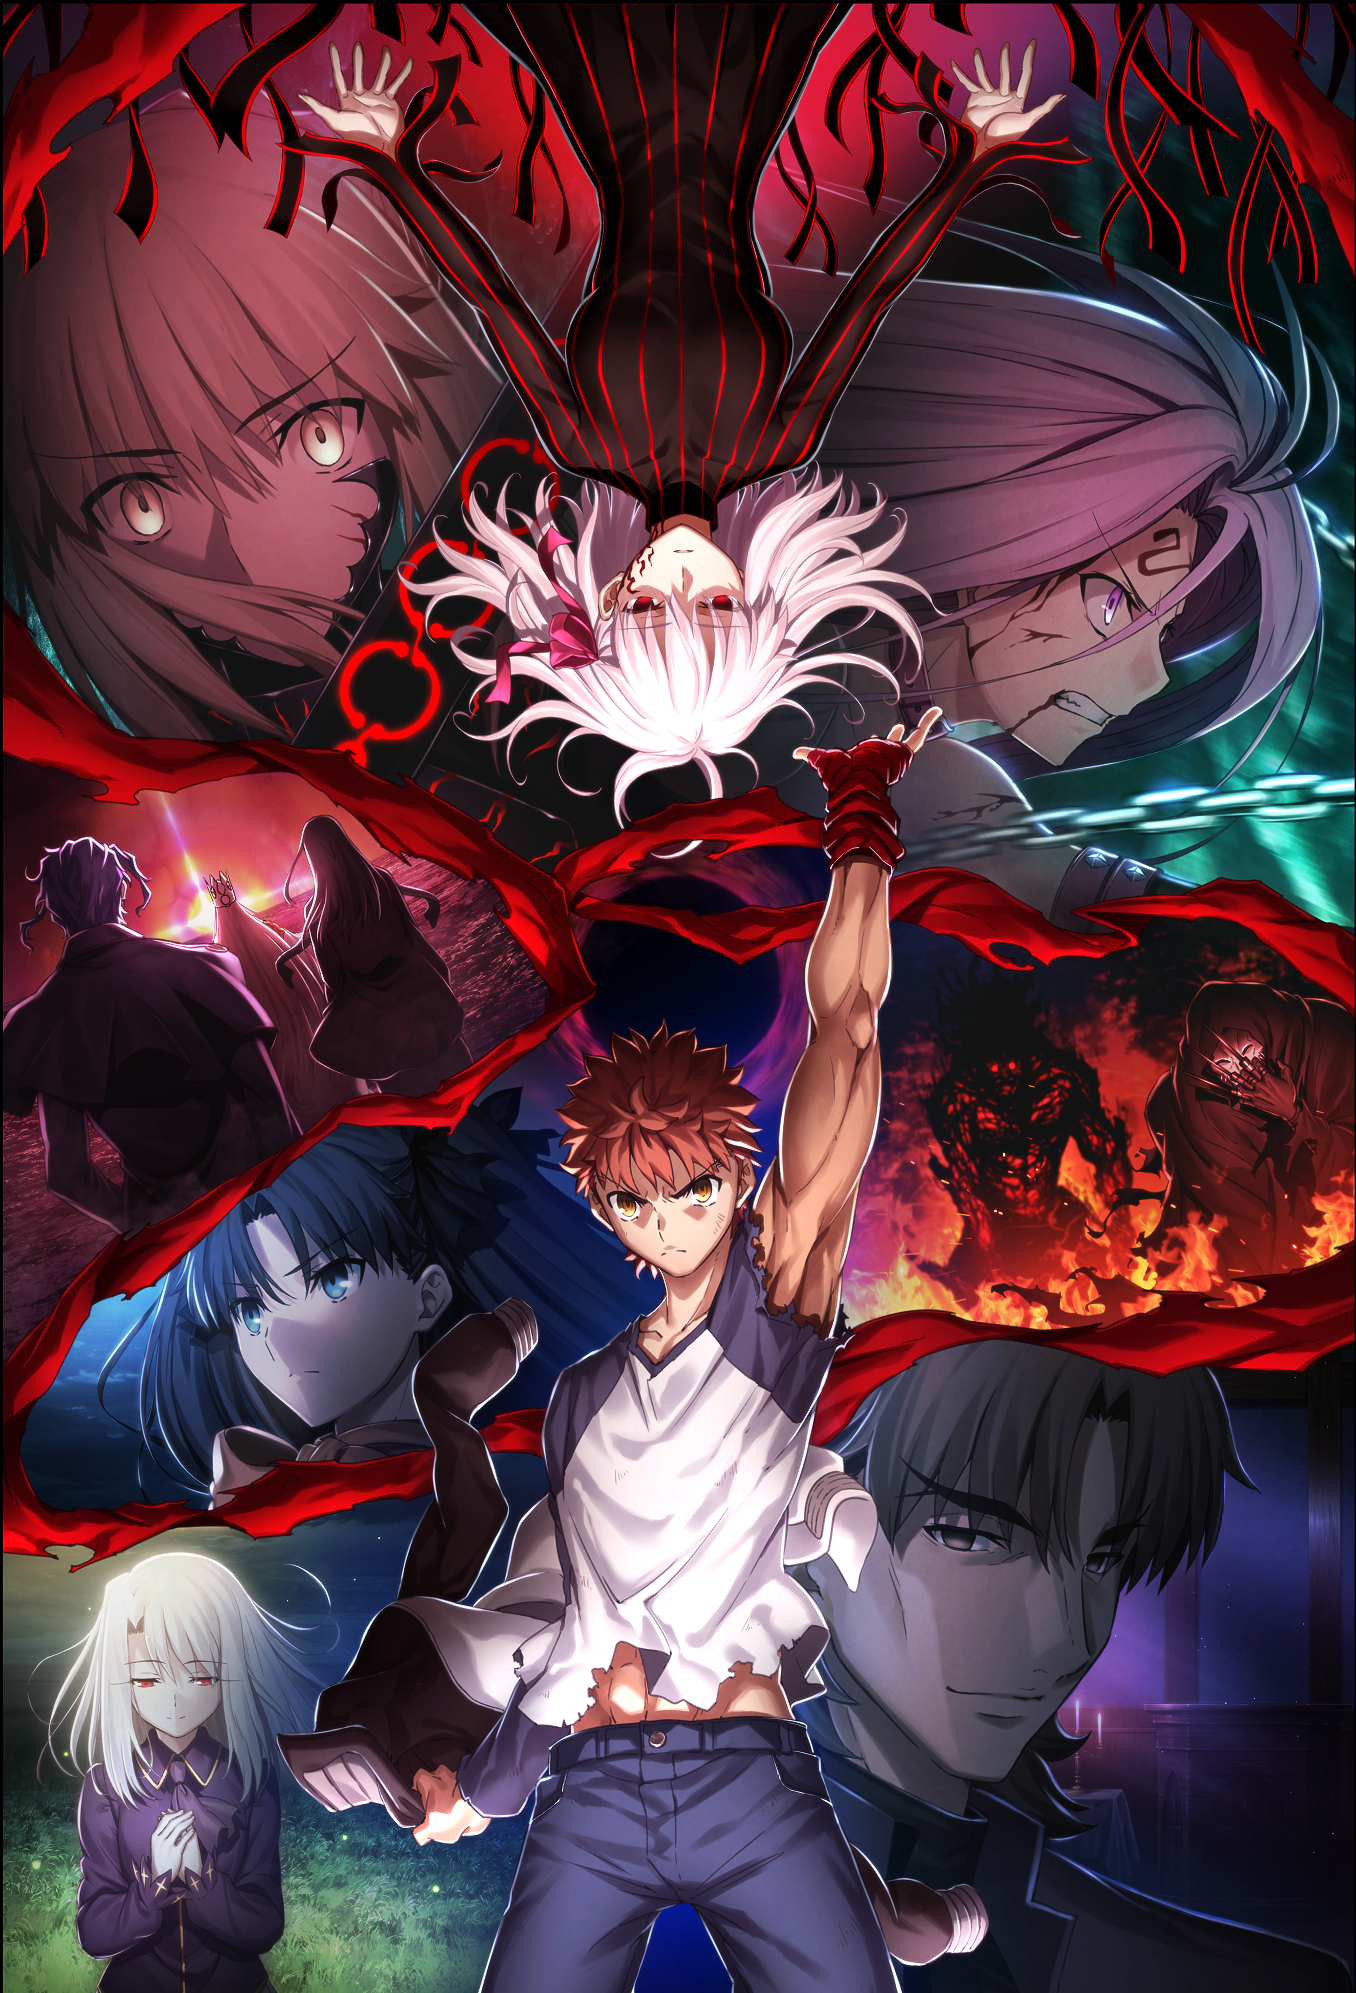 BUILD DIVIDE TCG Tie-Up Booster ｢Fate/stay night [Heaven’s Feel]｣ Box